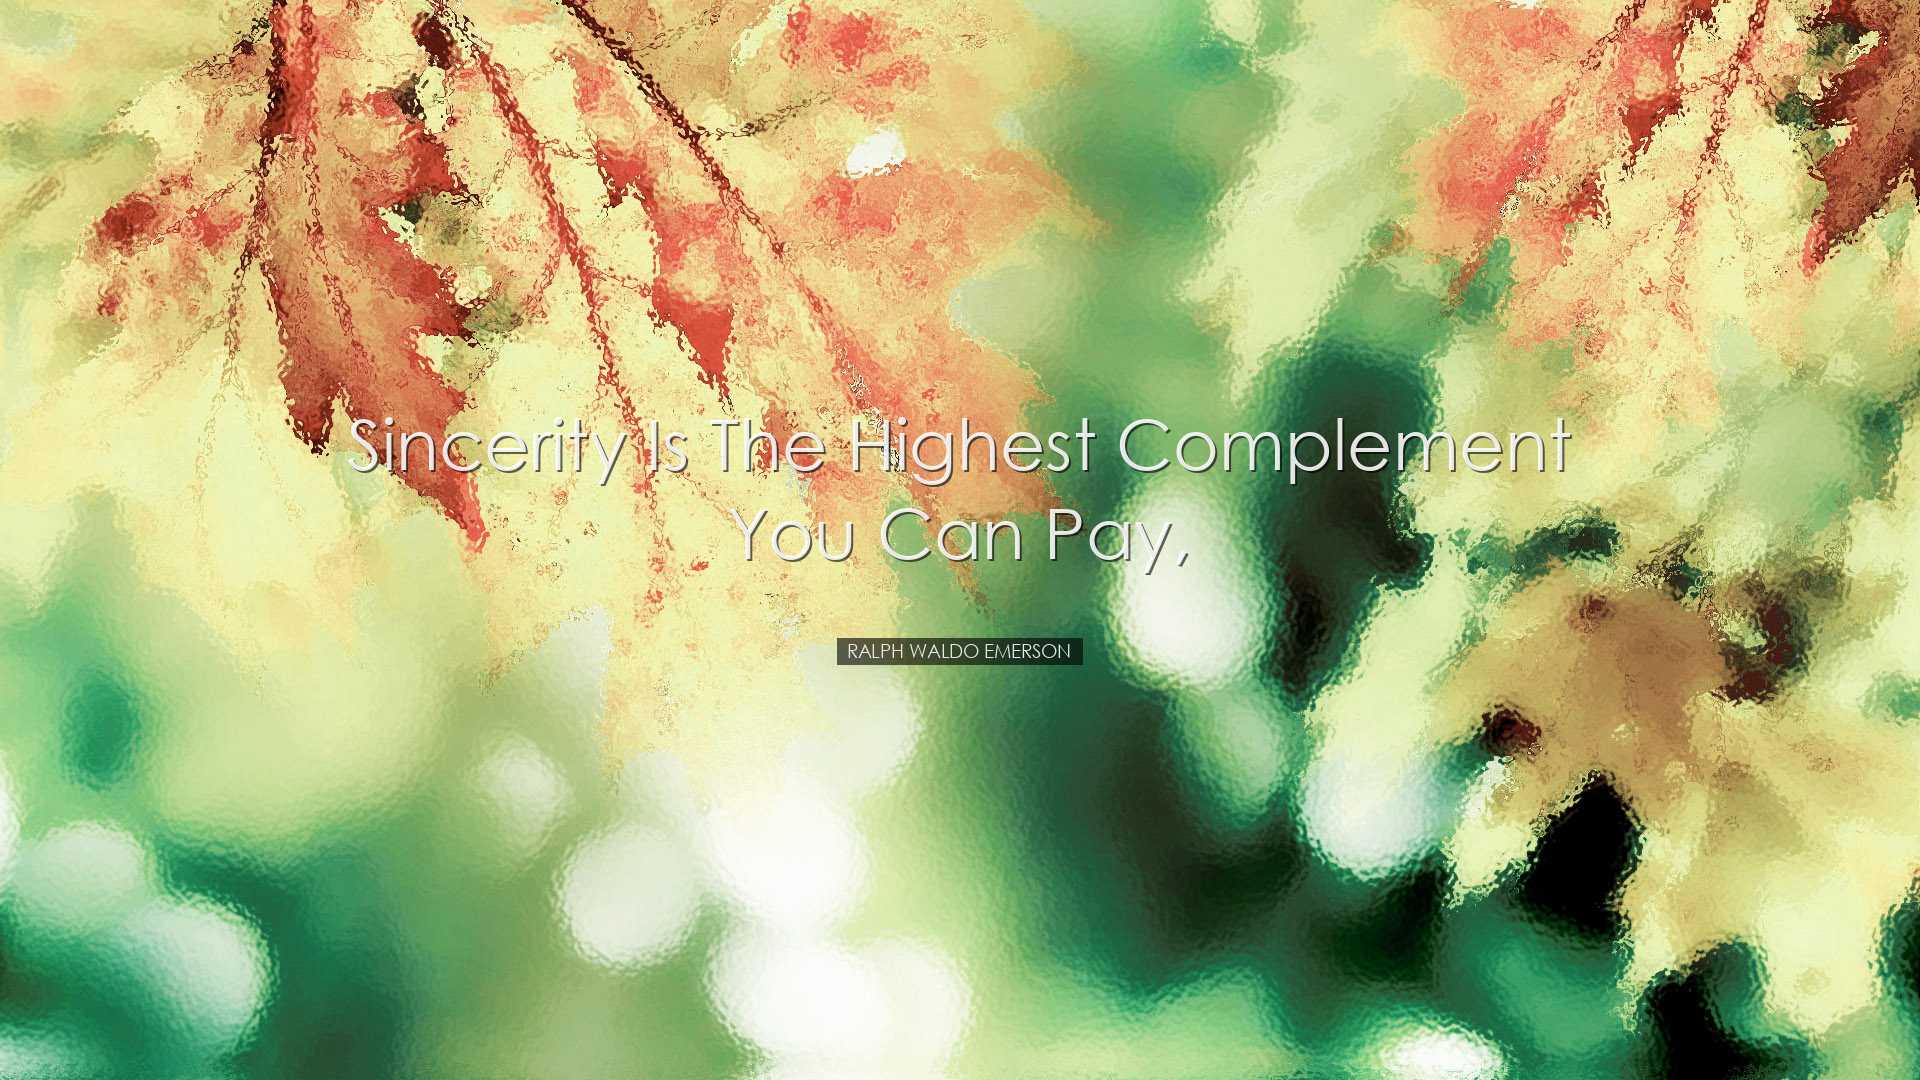 Sincerity is the highest complement you can pay, - Ralph Waldo Eme